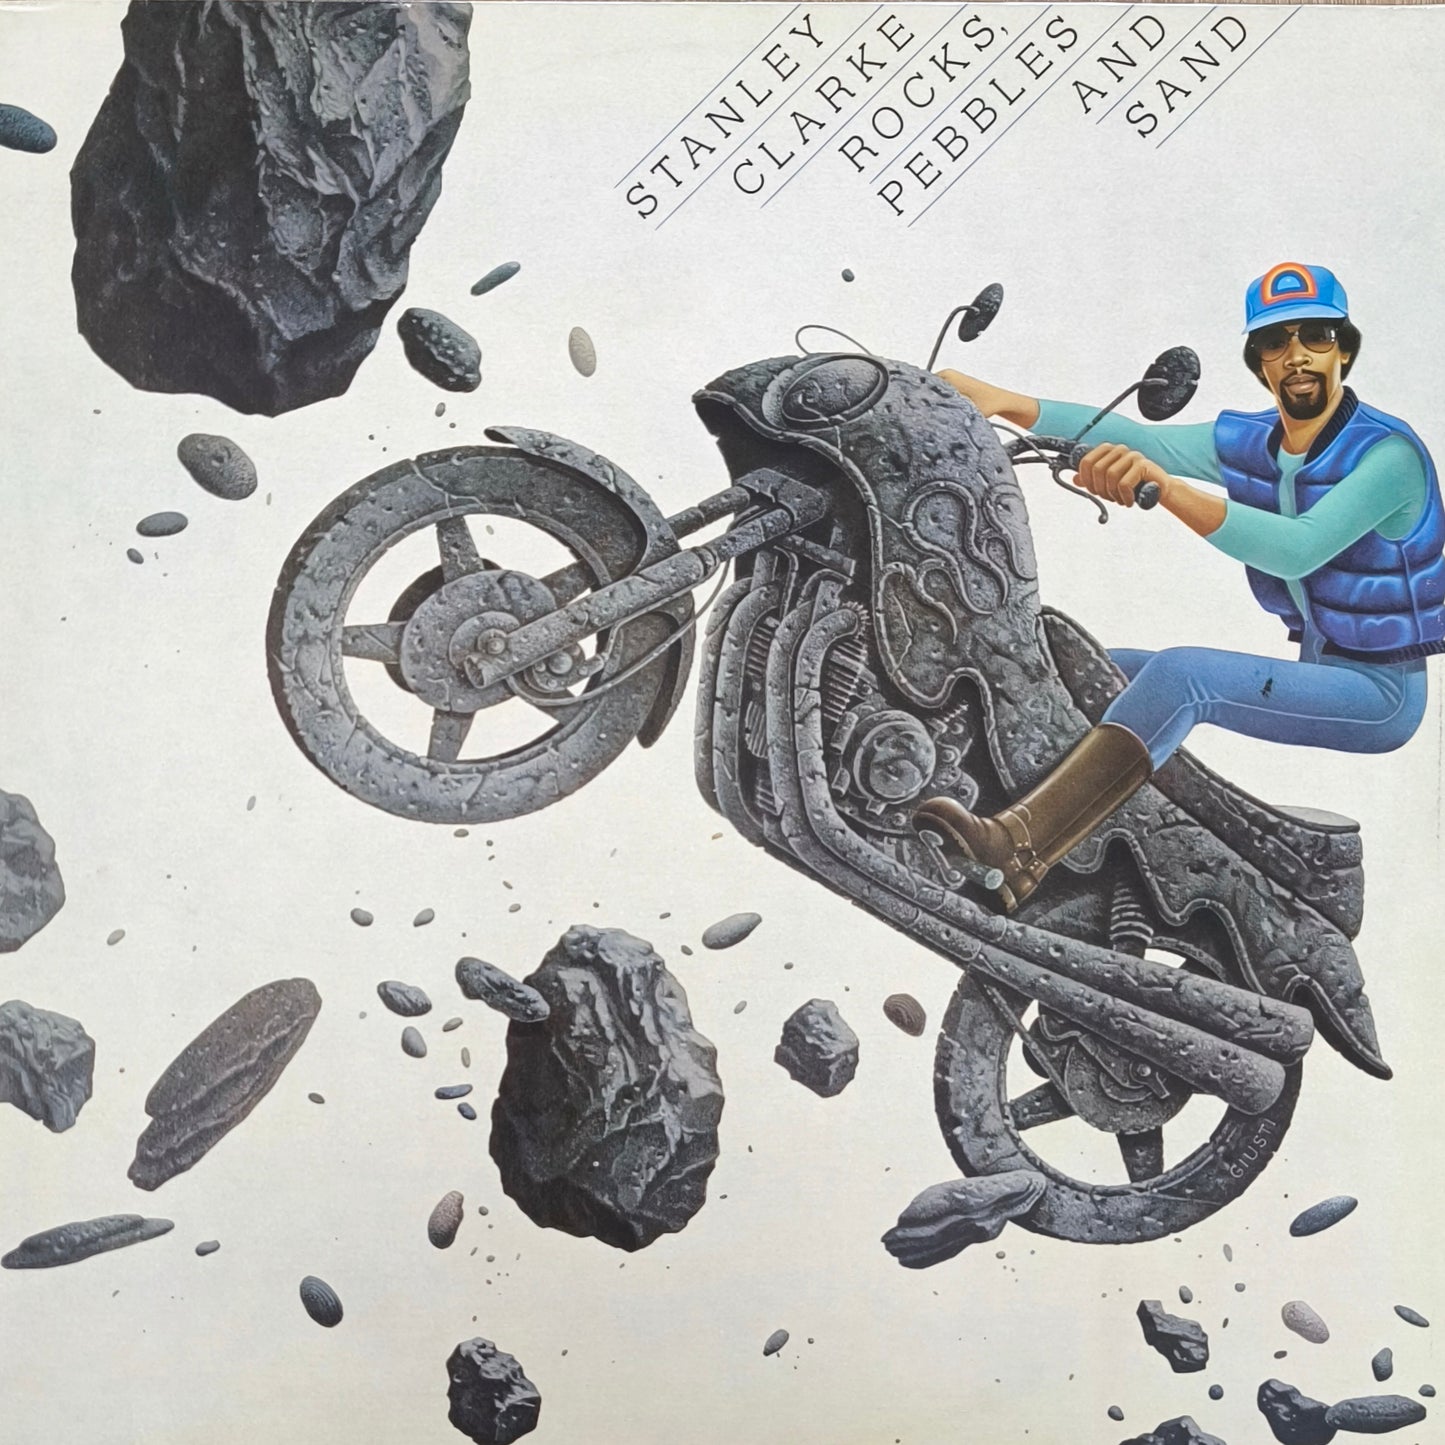 STANLEY CLARKE - Rocks, Pebbles And Sand